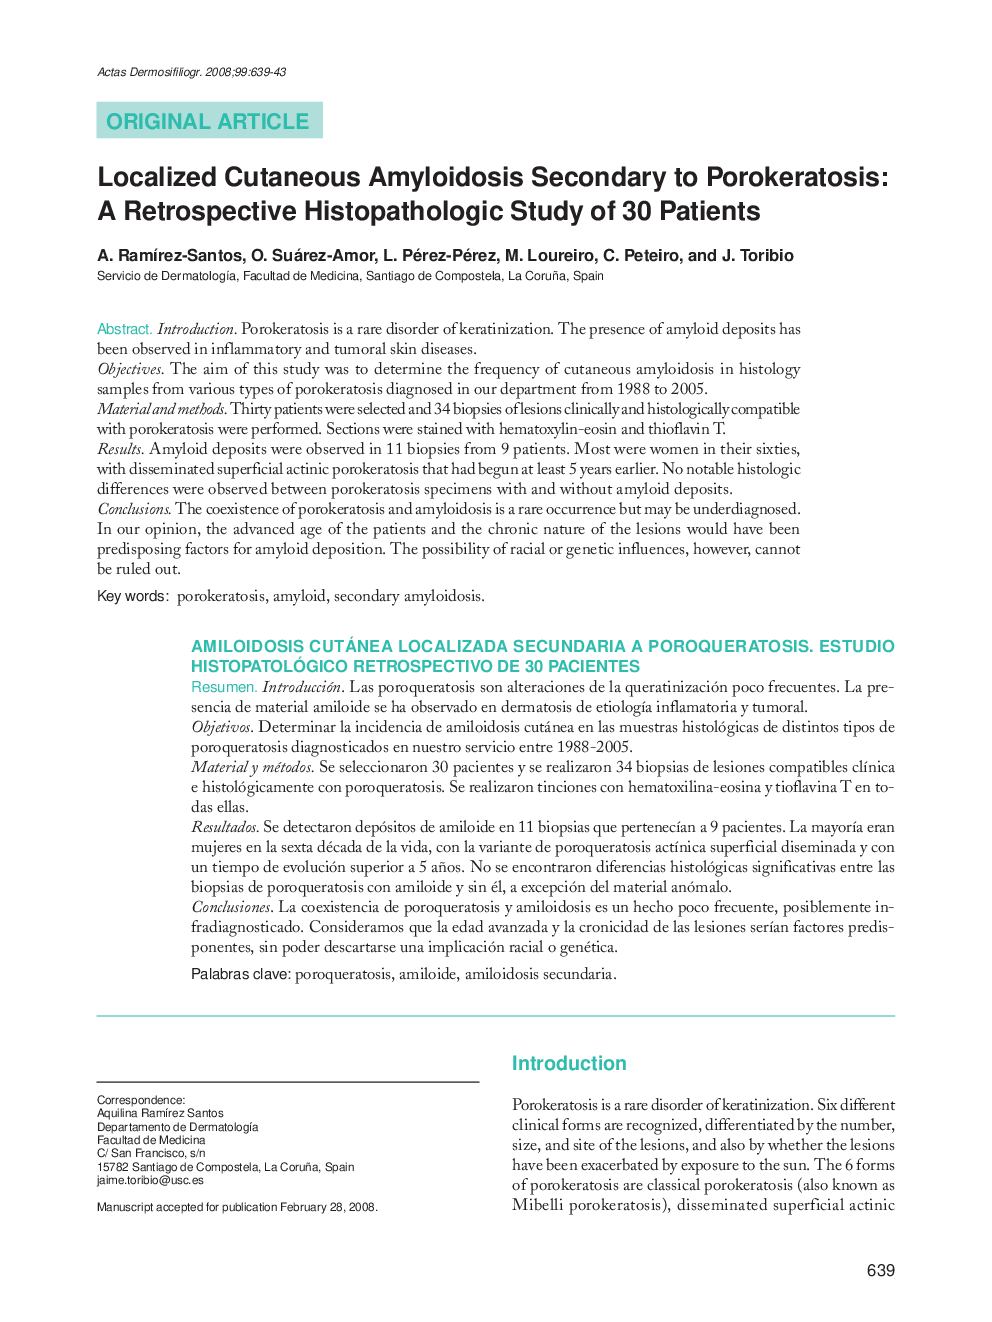 Localized Cutaneous Amyloidosis Secondary to Porokeratosis: A Retrospective Histopathologic Study of 30 Patients